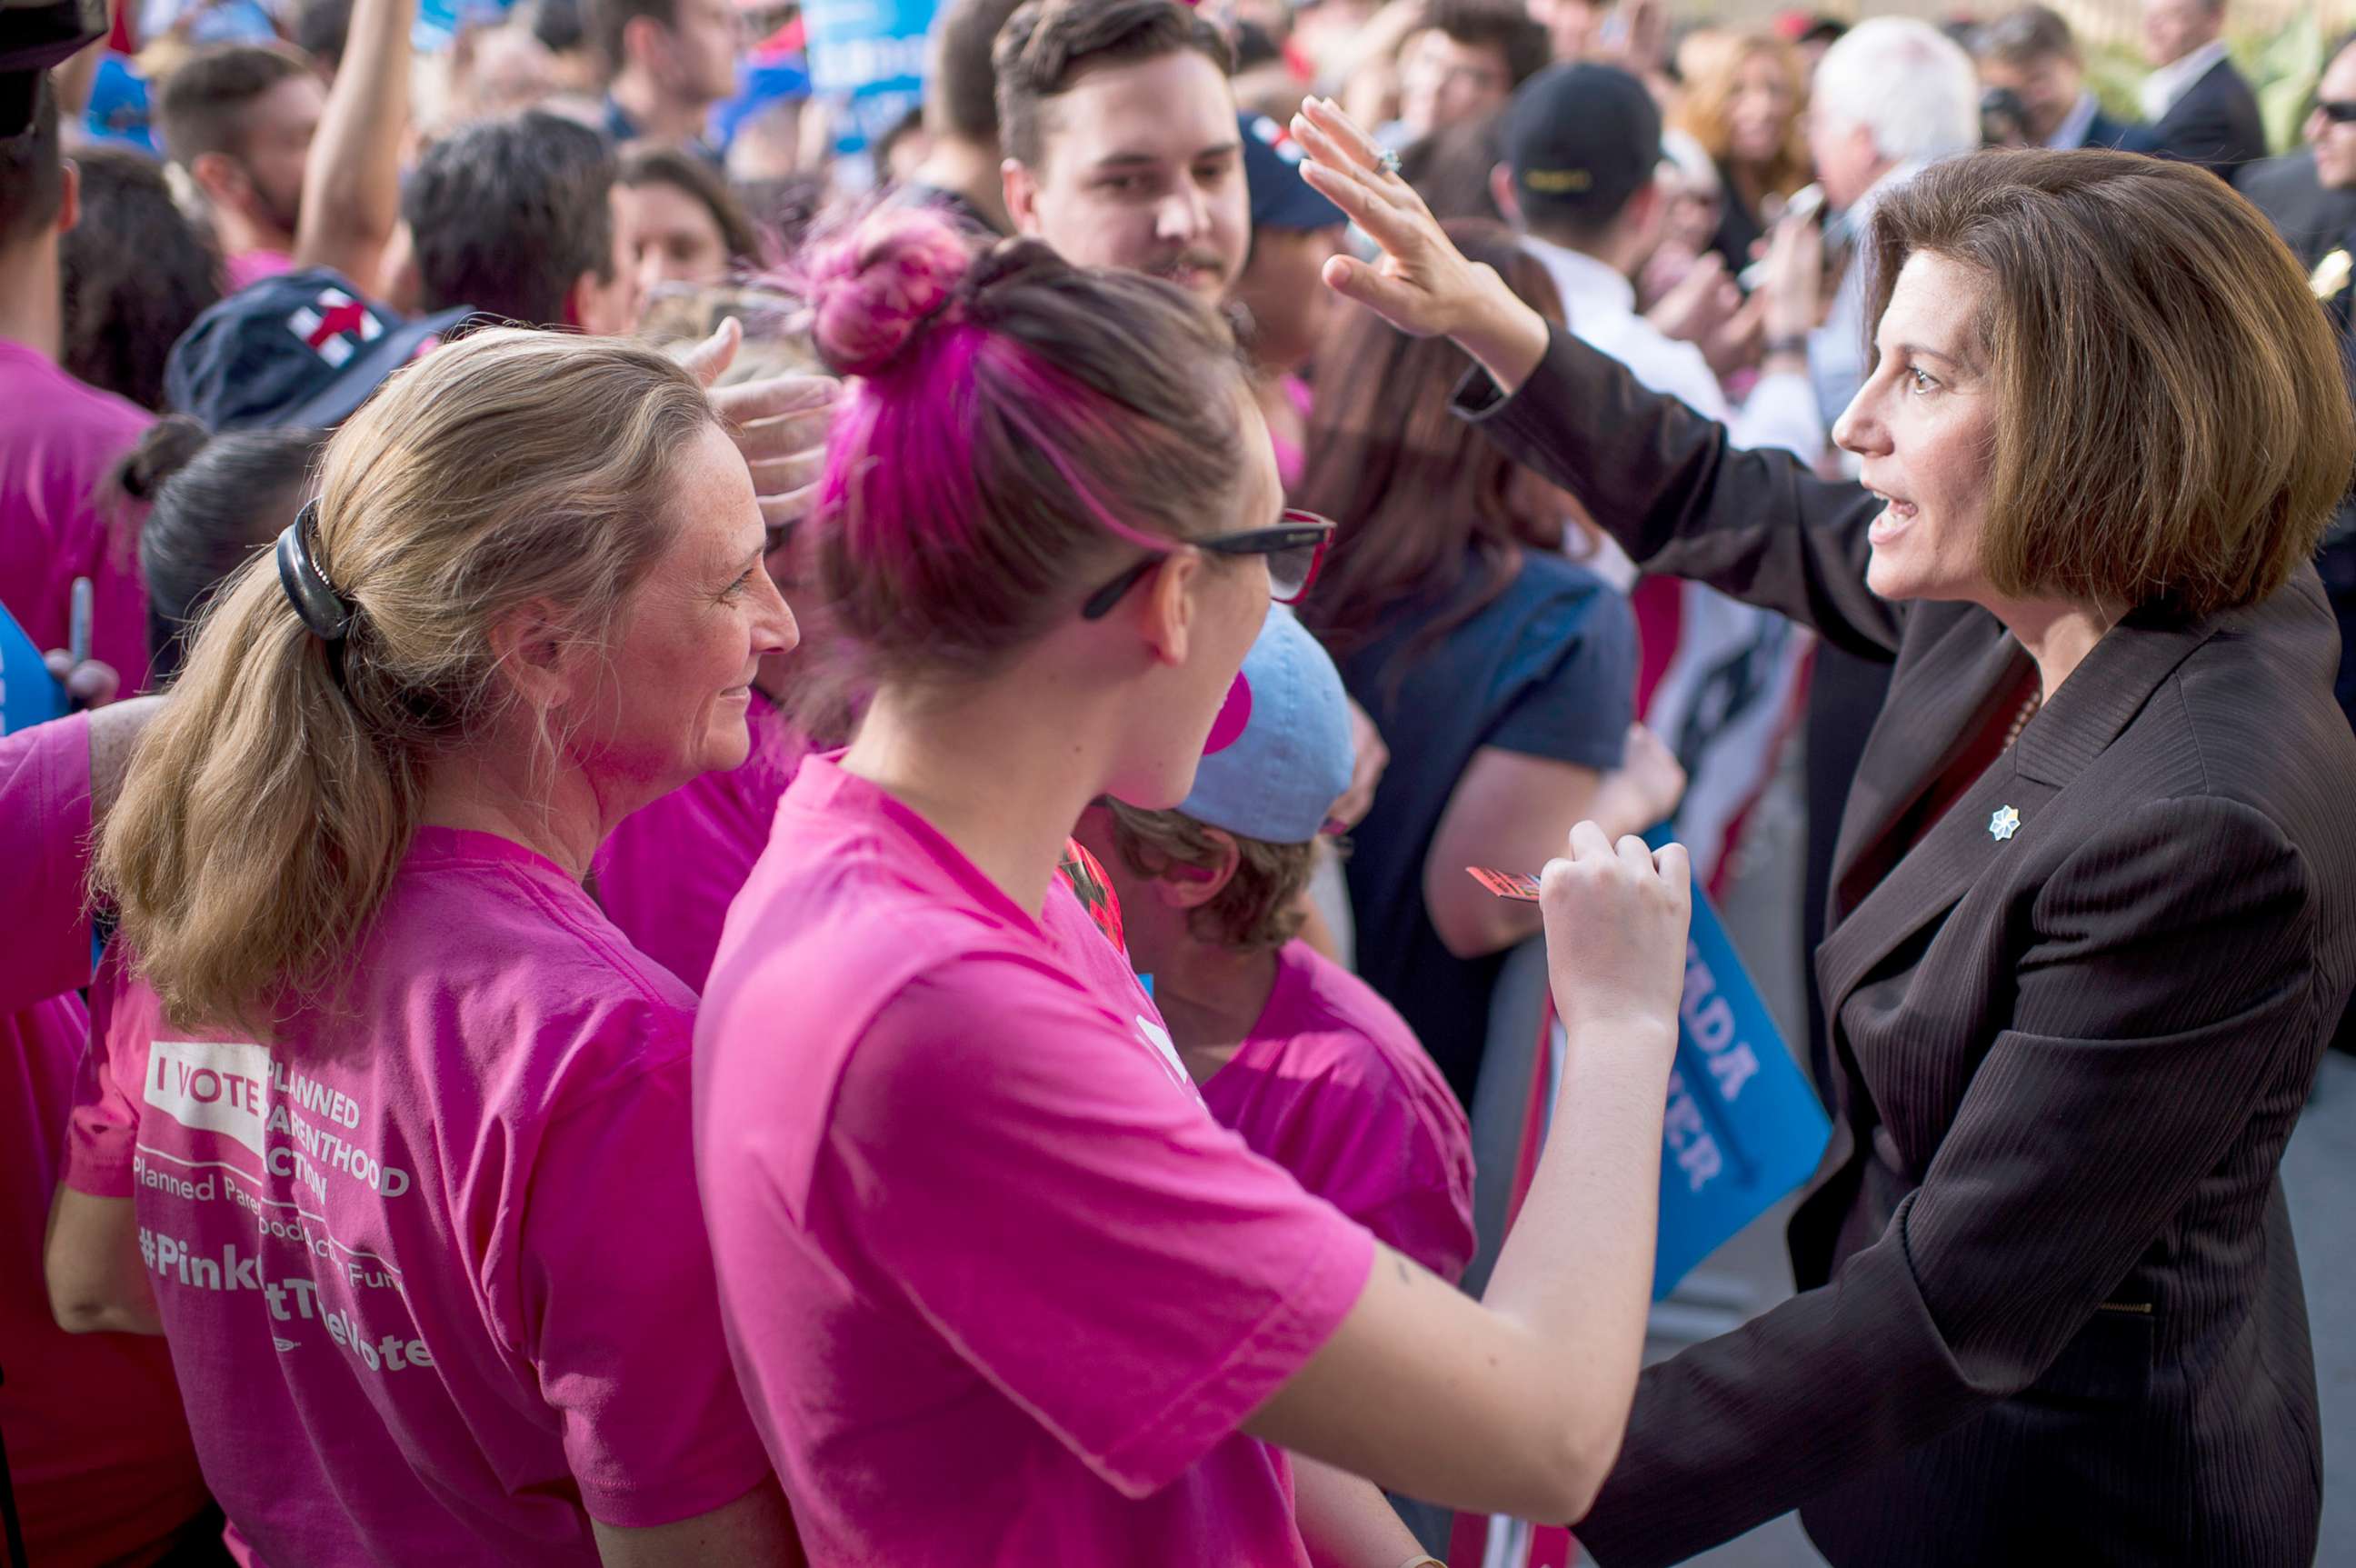 PHOTO: Catherine Cortez Masto, Democratic candidate for Senate from Nevada, shakes hands with the crowd after a campaign rally in Las Vegas, Nov. 6, 2016.